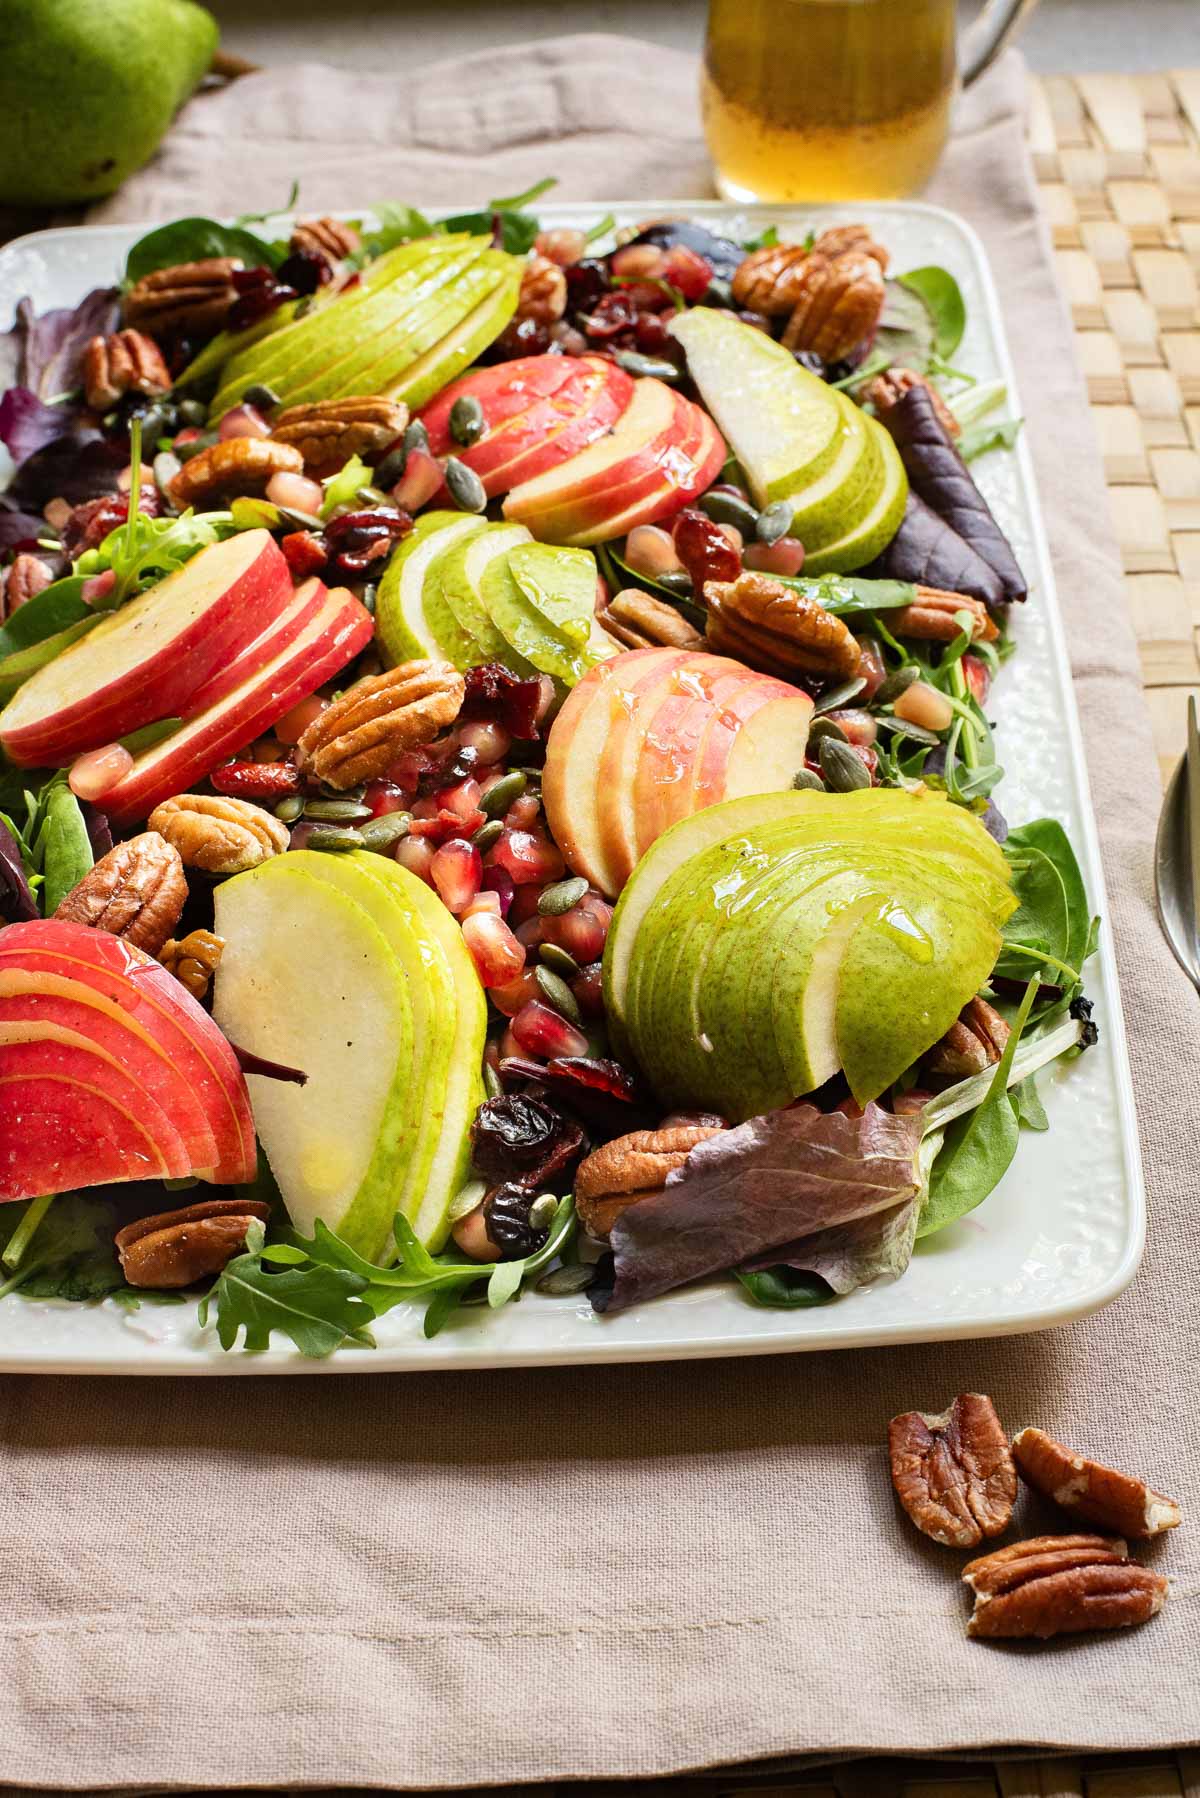 A salad with pears, apples and pecans on a white serving plate.